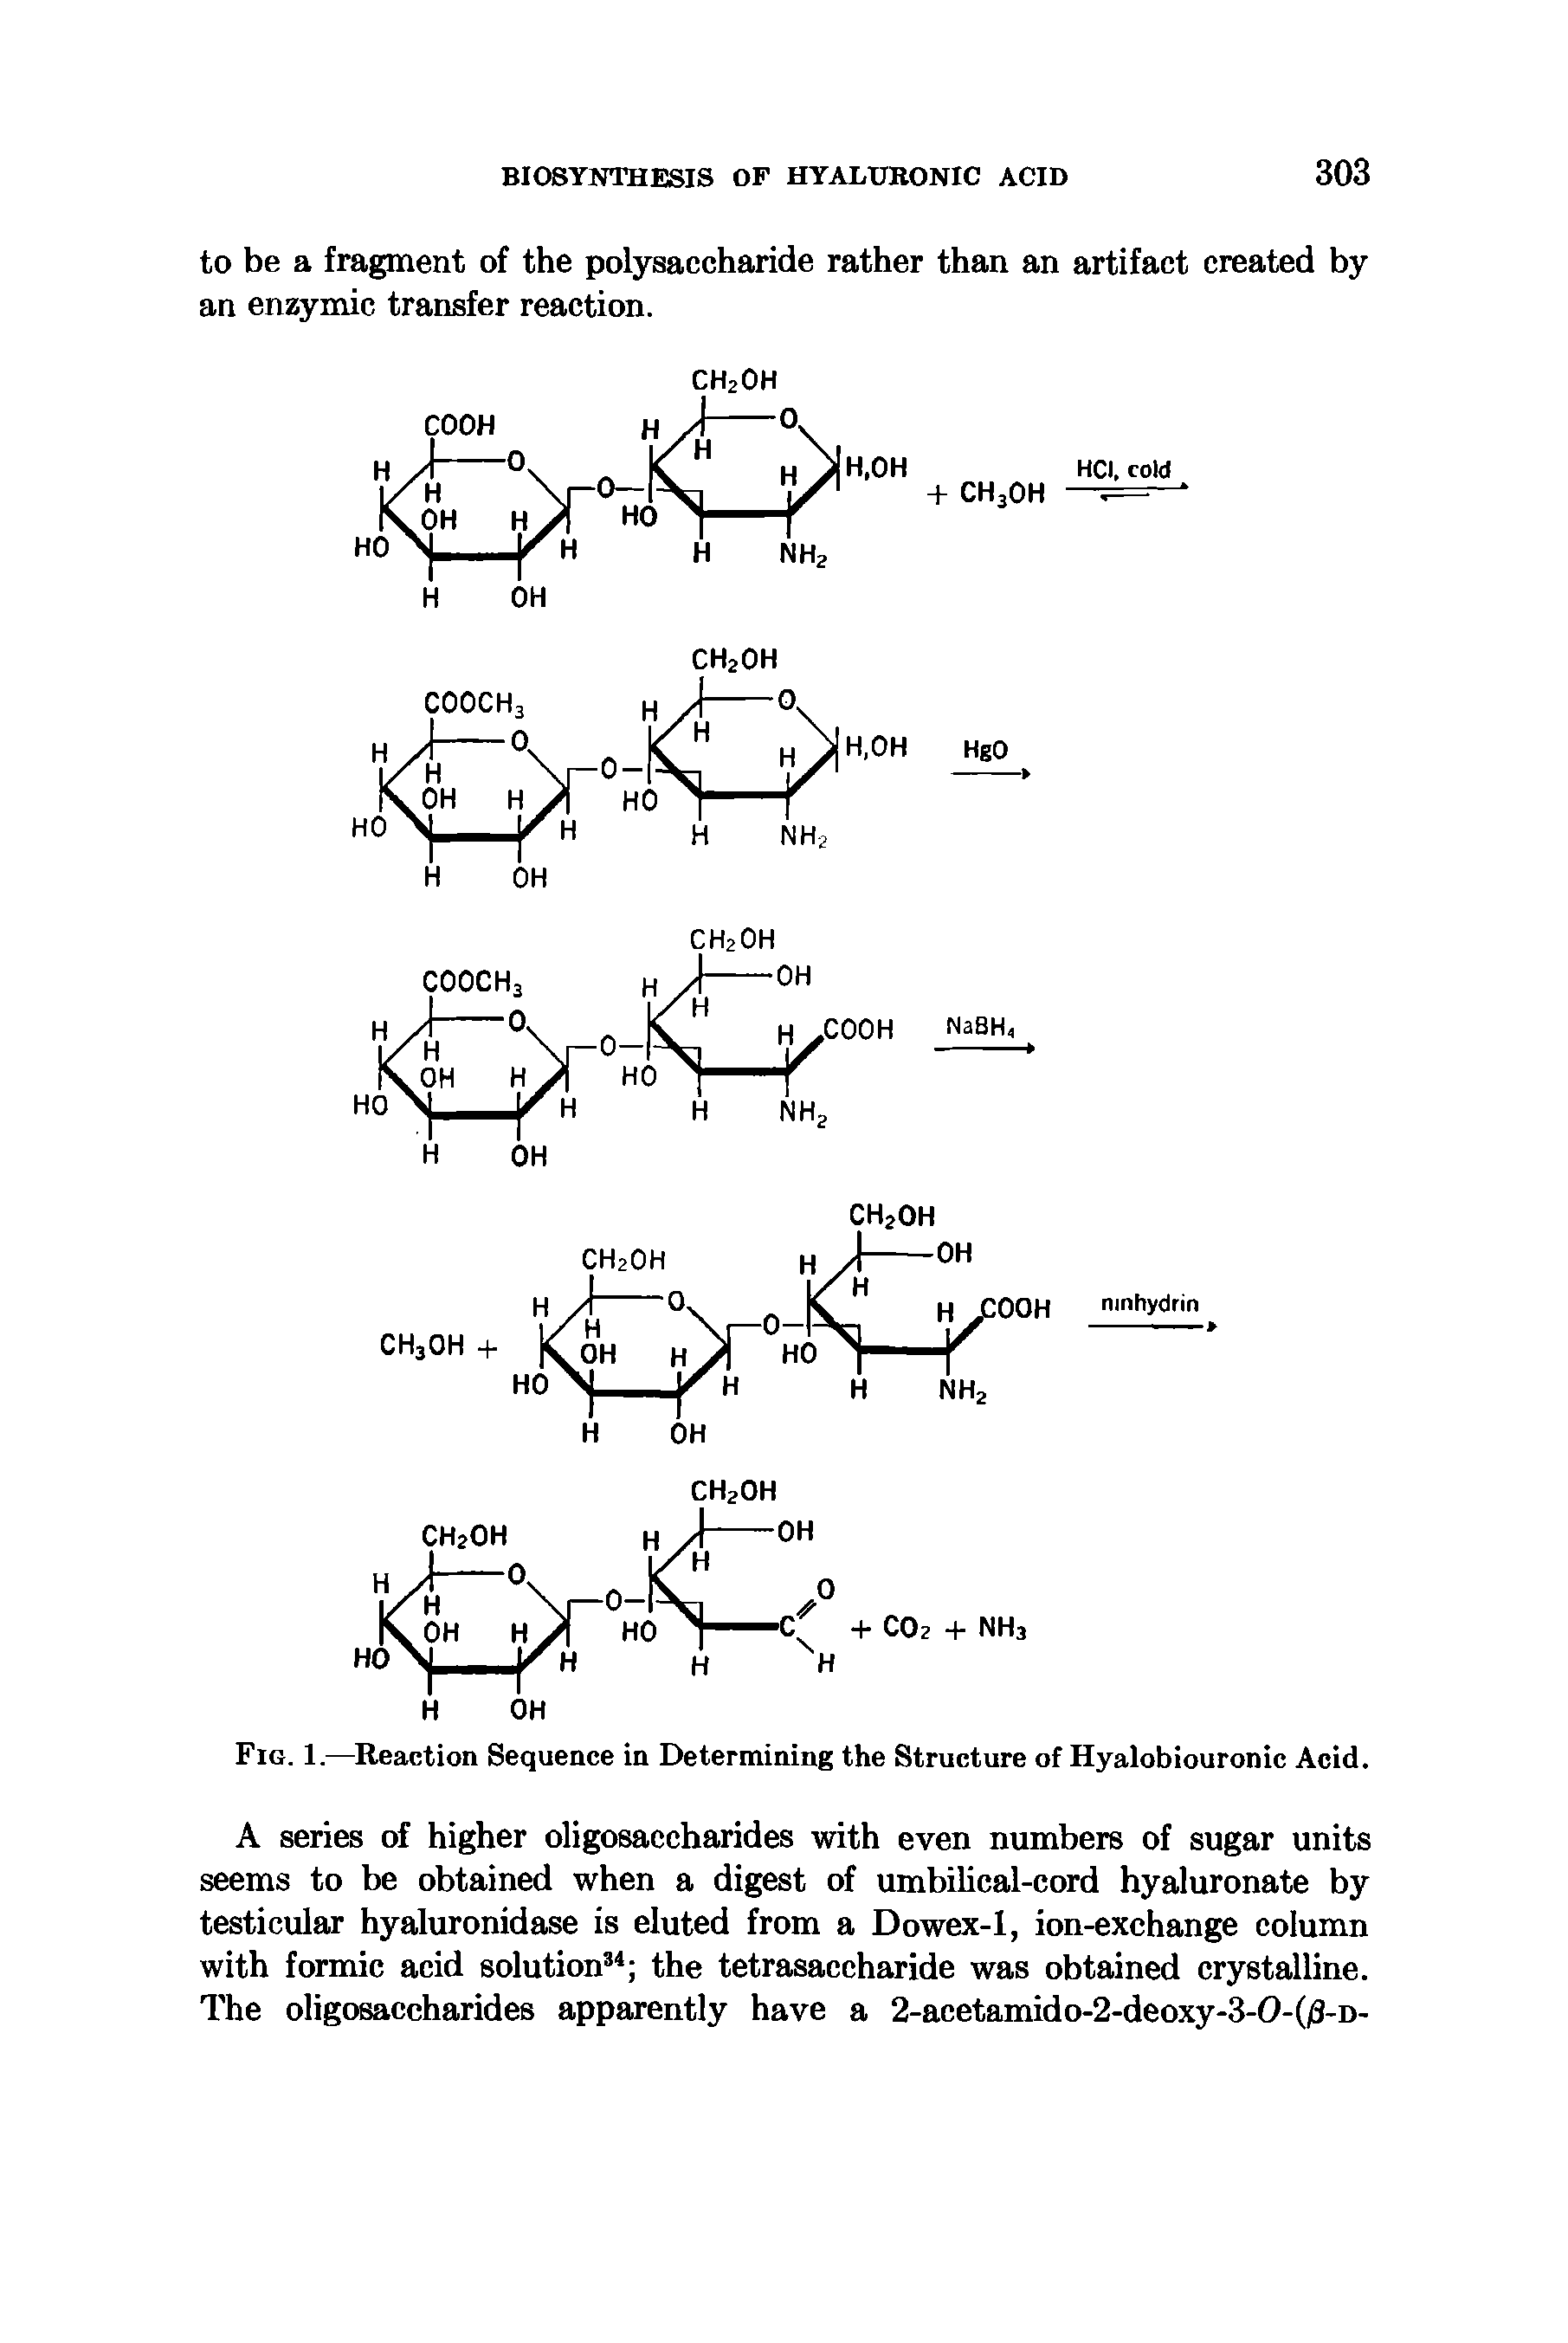 Fig. 1.—Reaction Sequence in Determining the Structure of Hyalobiouronic Acid.